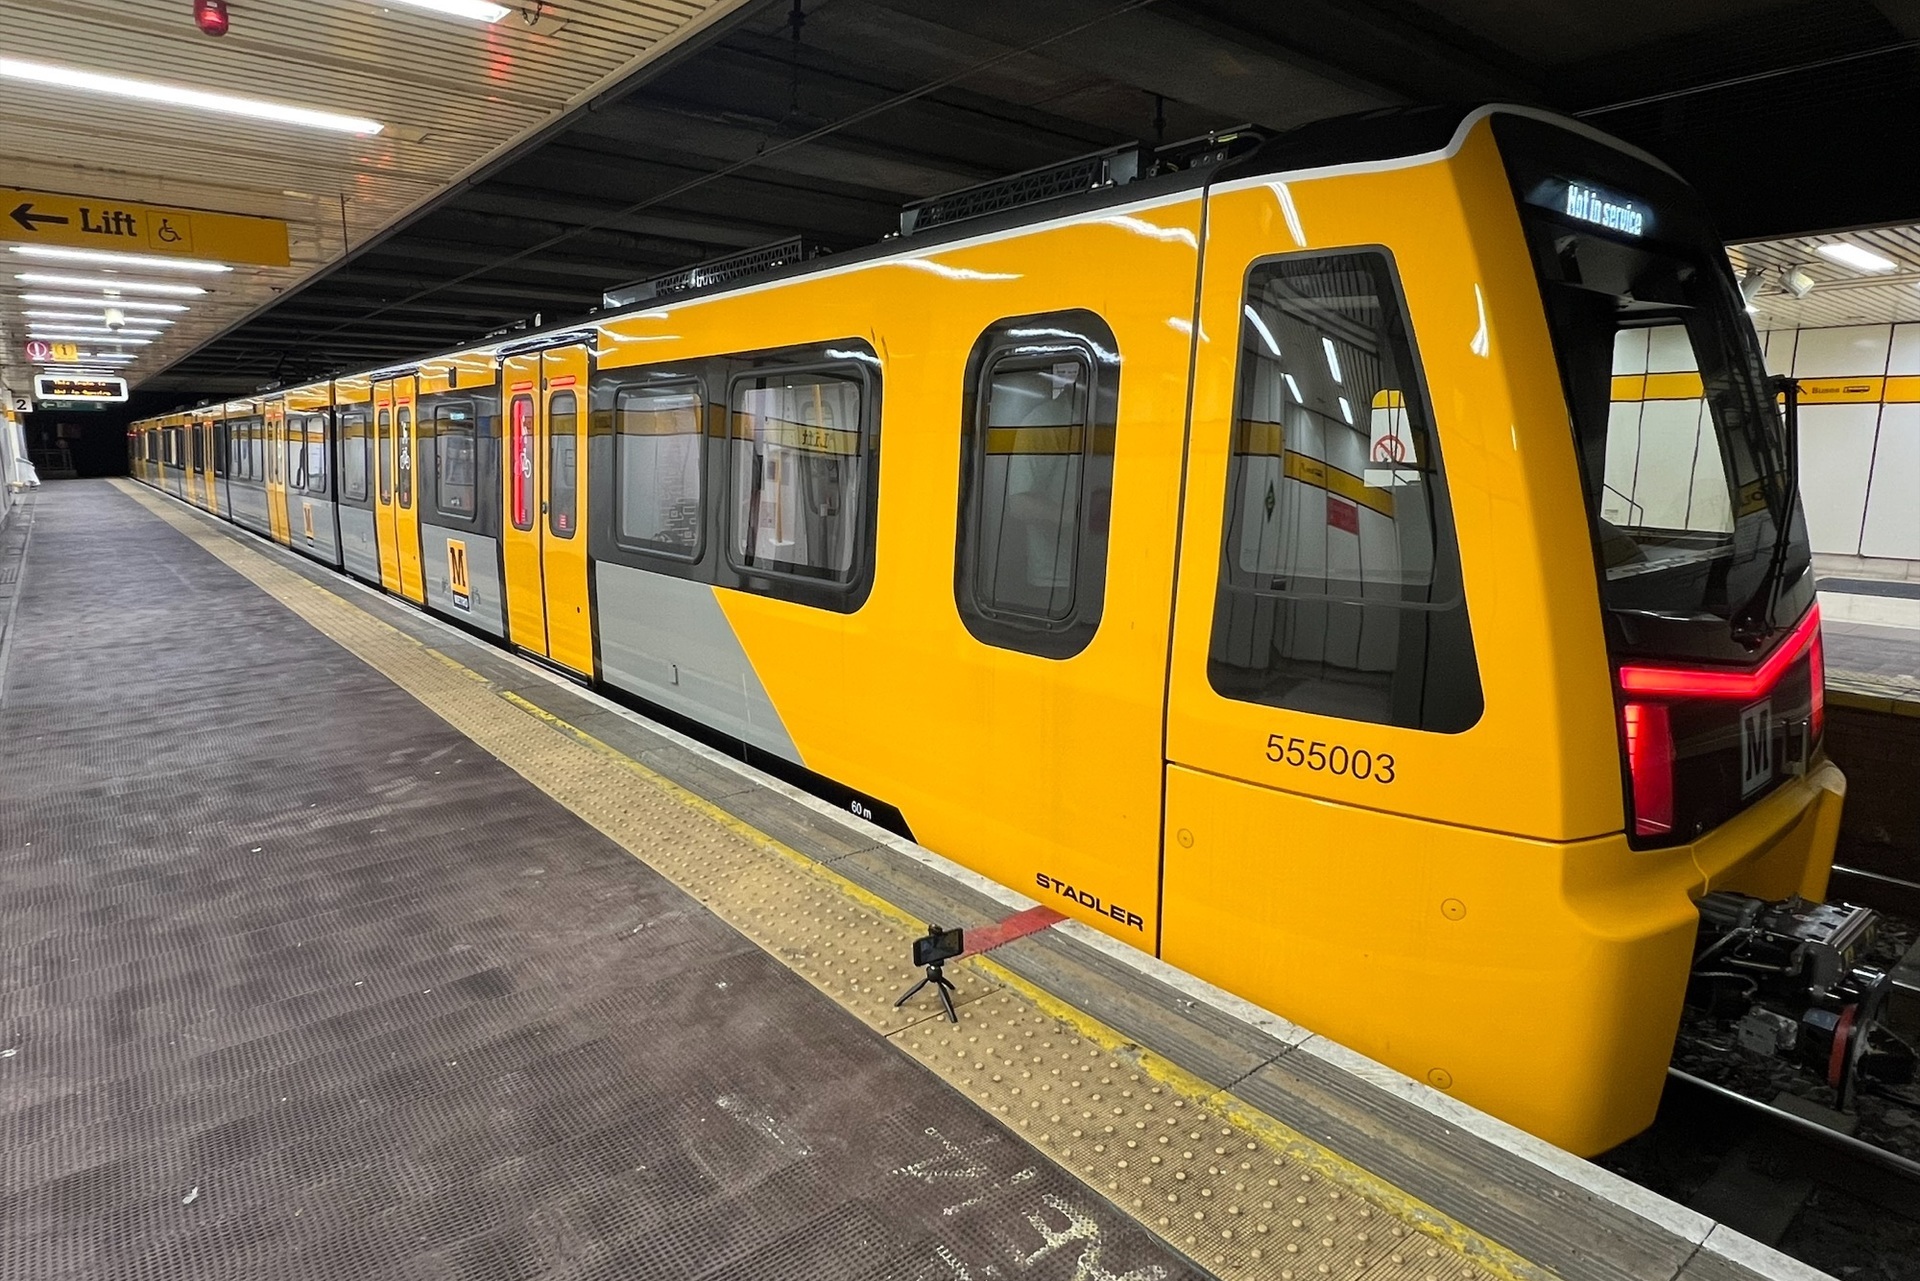 The Stadler Class 555 Metro train, the first of 46 that Nexus has on order, is undergoing a period of testing and driver training before entering service for customers. (Nexus)